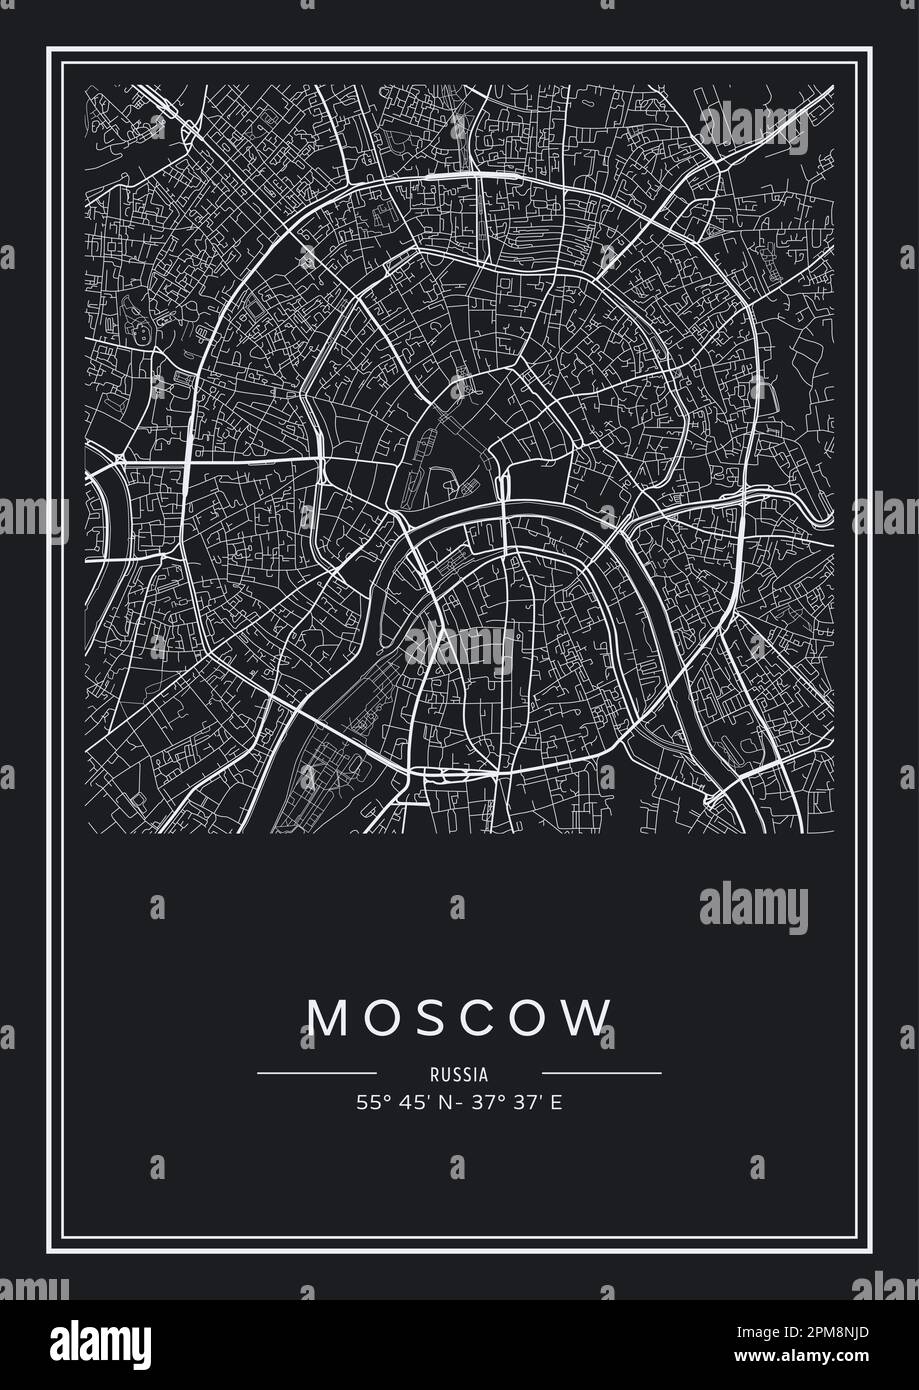 Black and white printable Moscow city map, poster design, vector illistration. Stock Vector